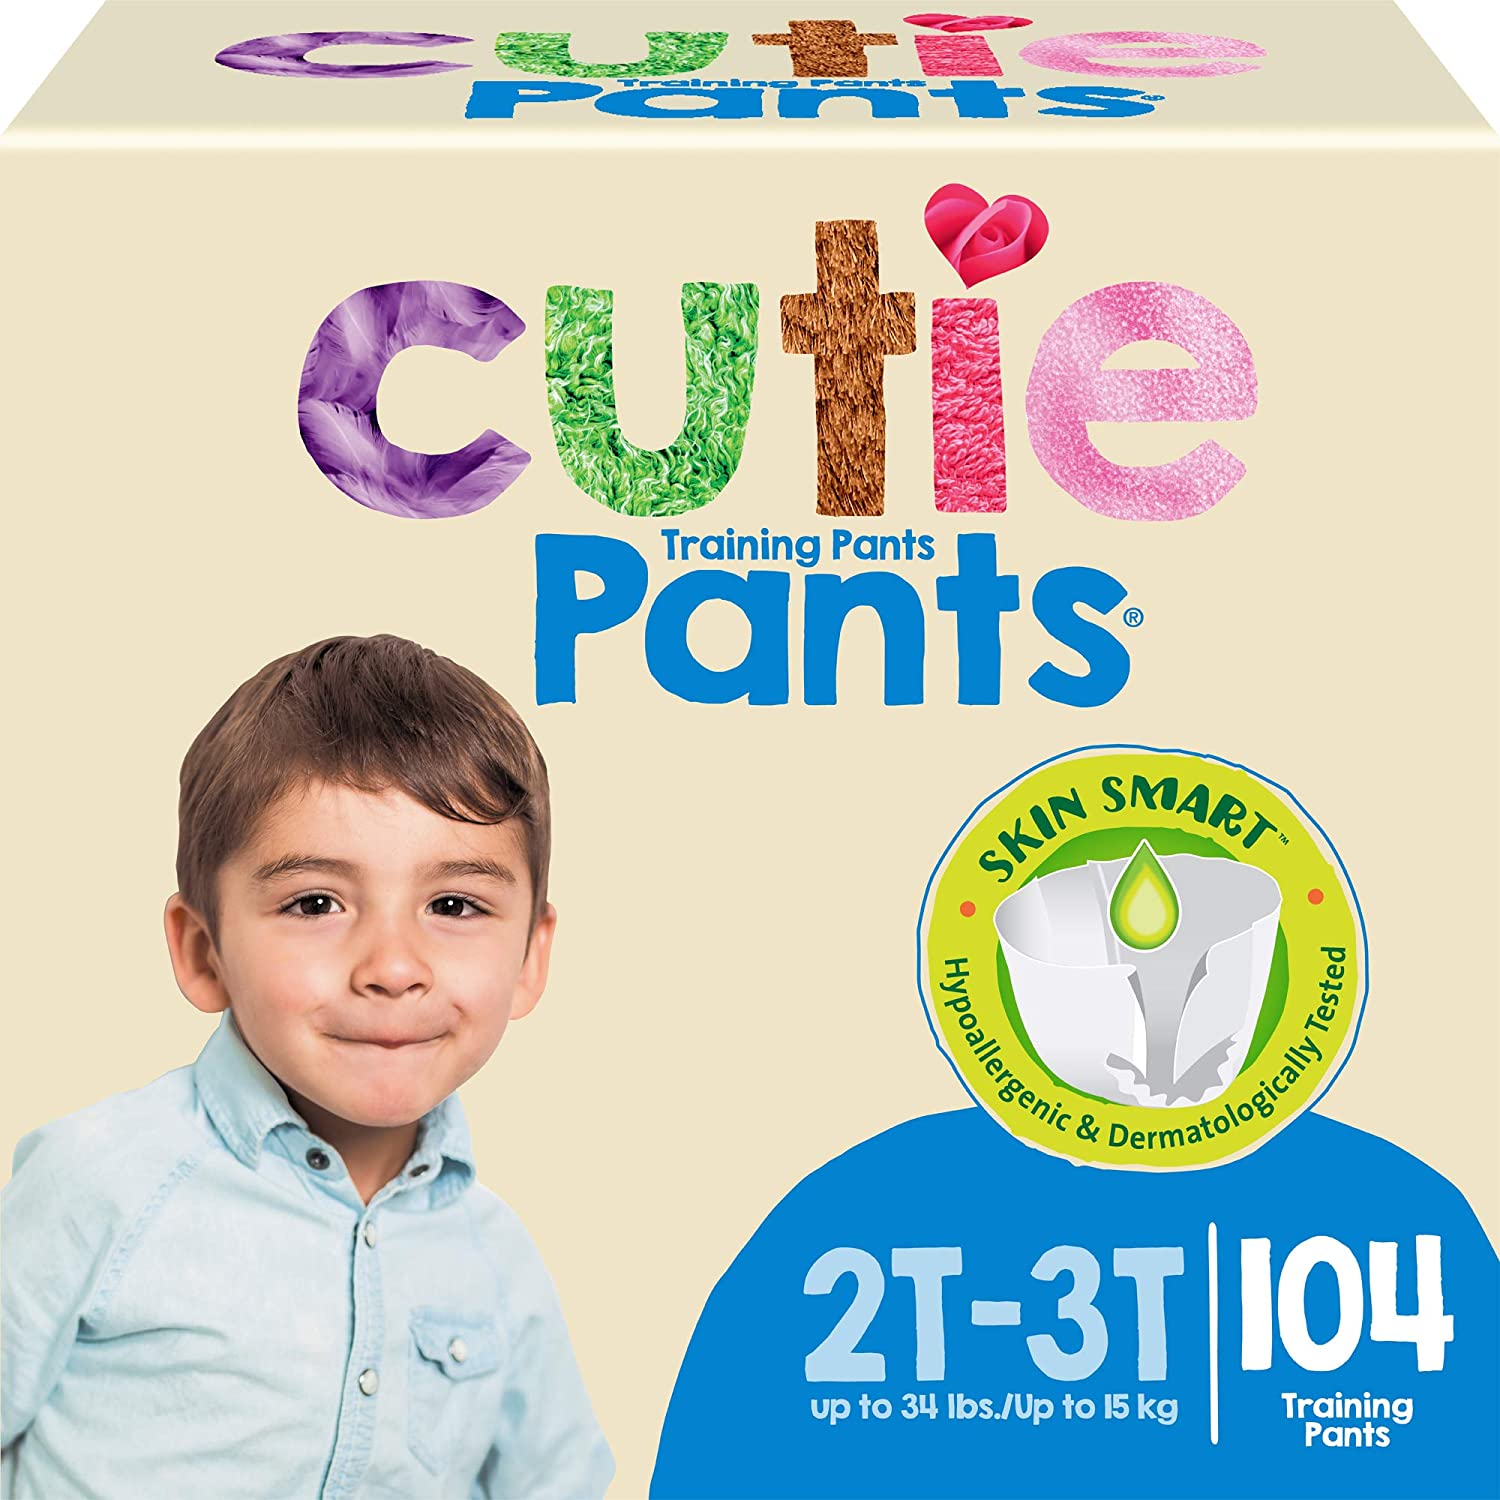 Cuties Boys Training Pants Refastenable Sides, Hypoallergenic with Ski